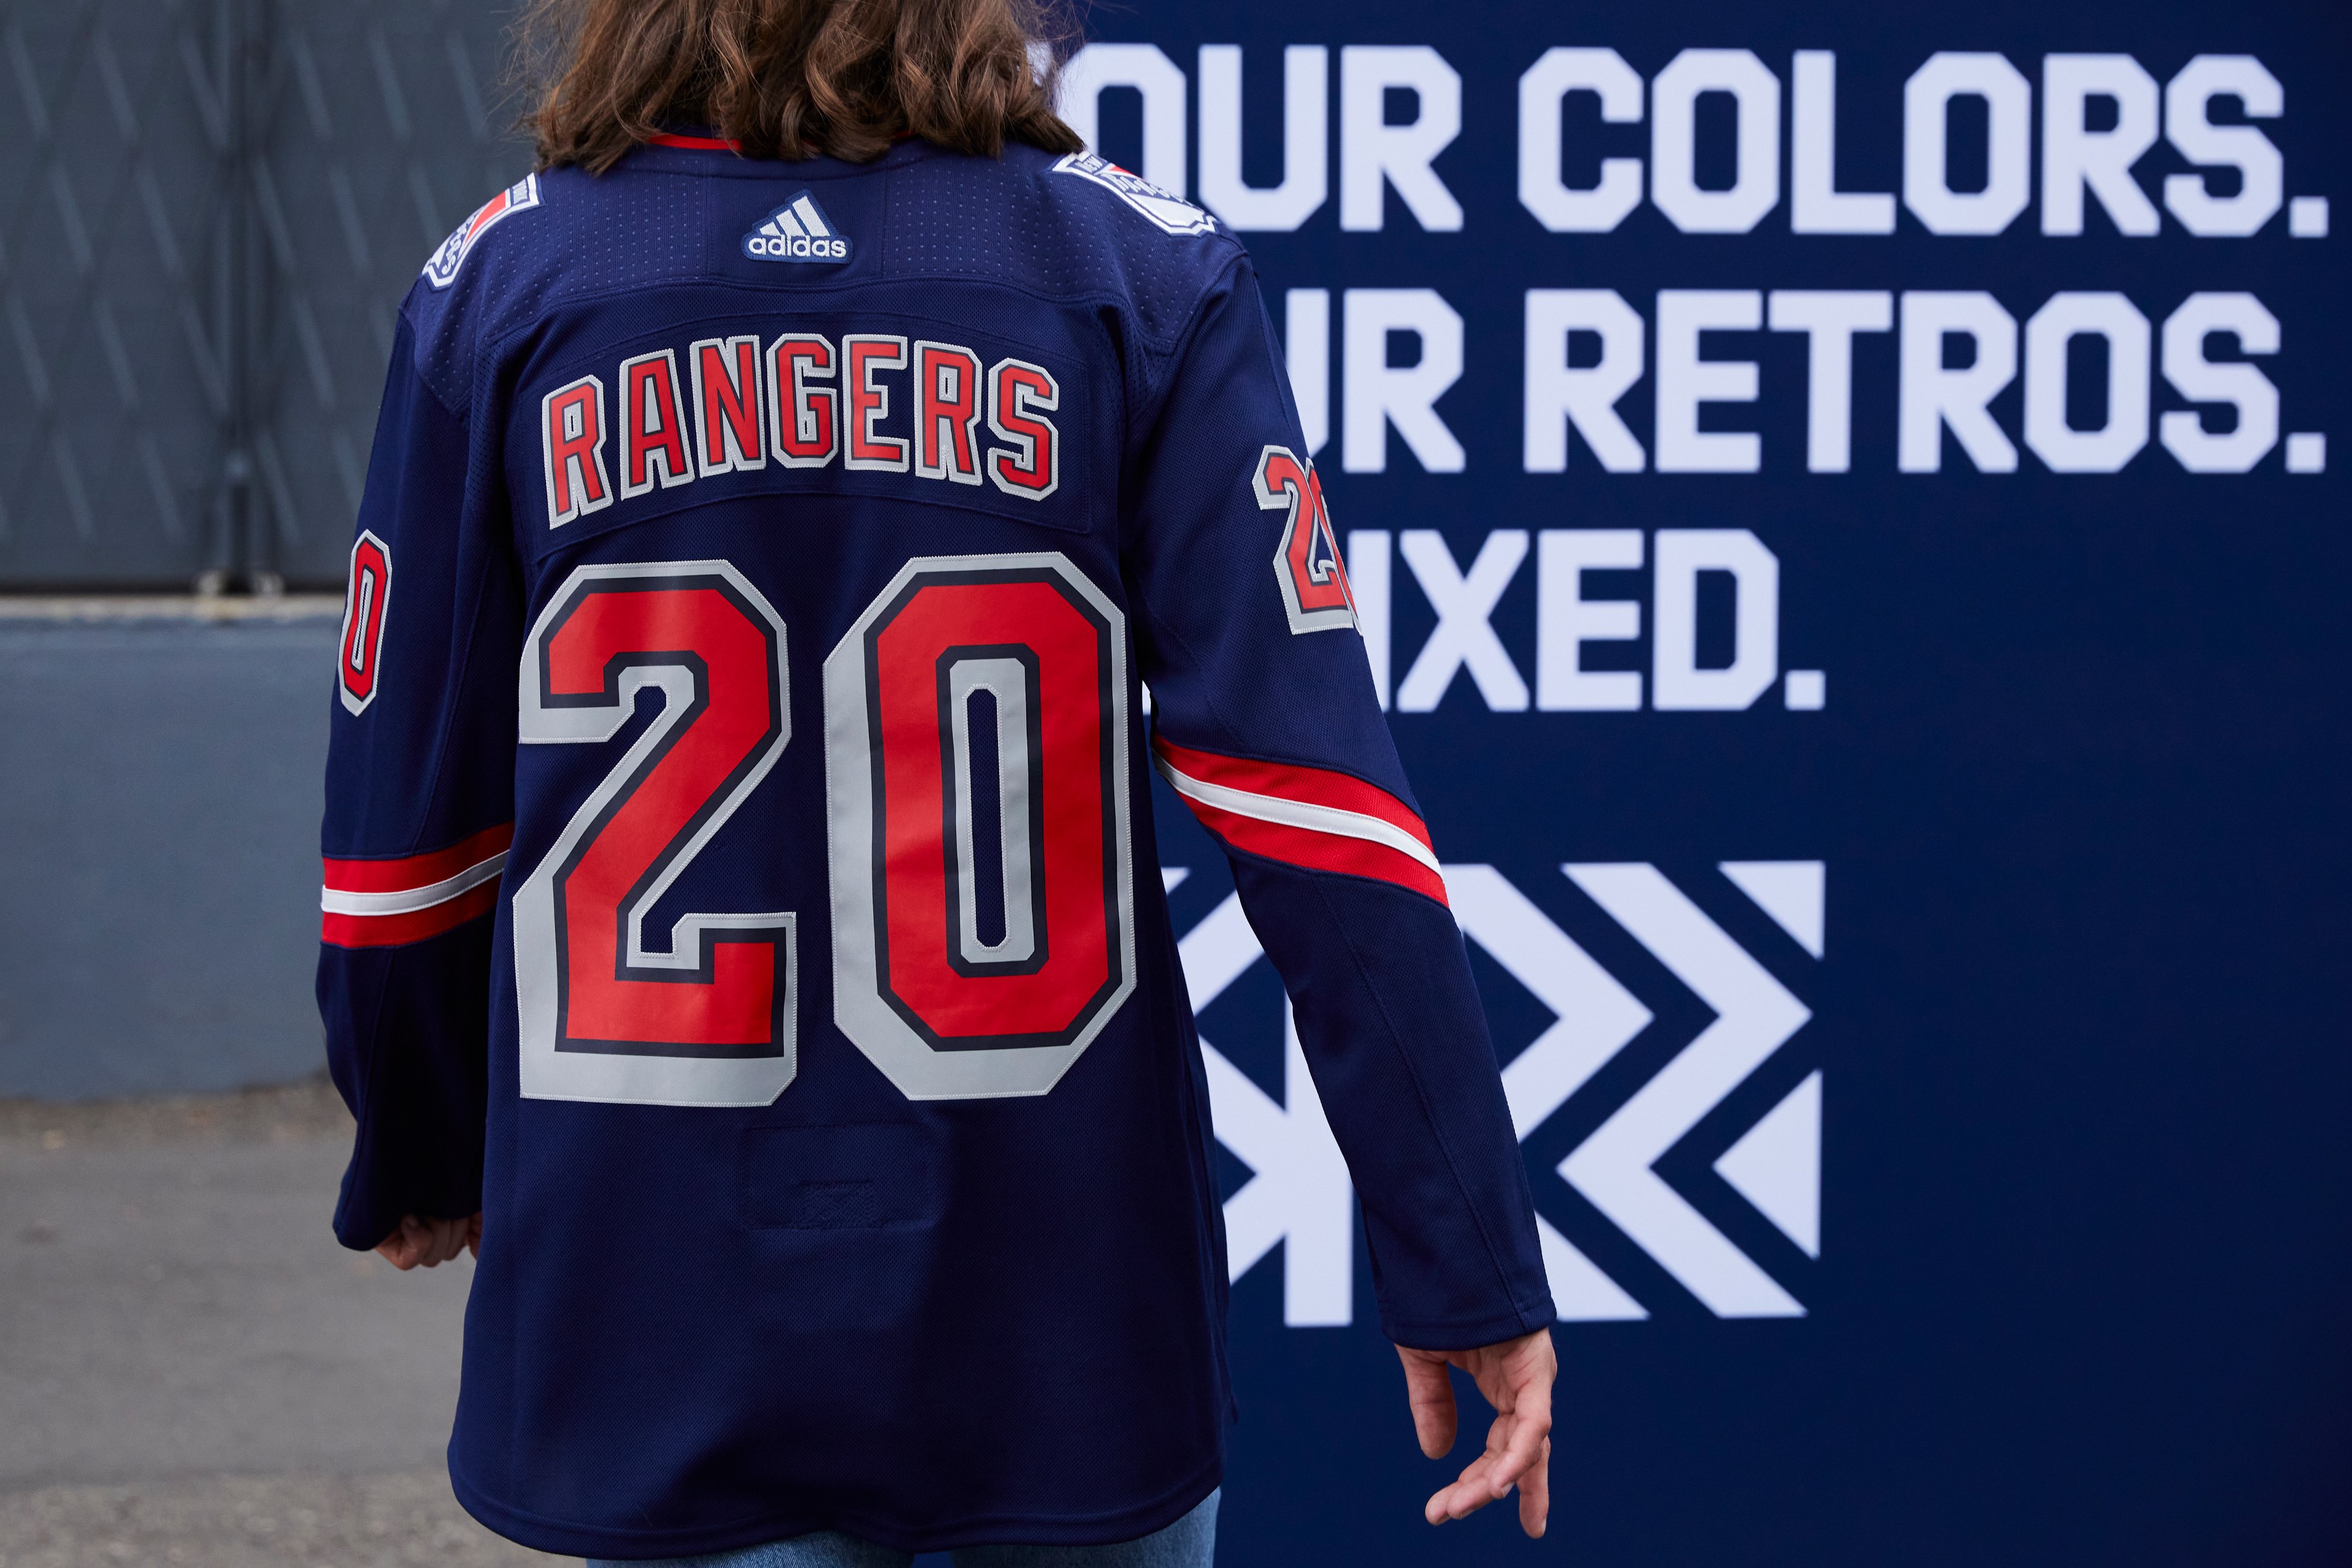 New York Rangers: Give me Liberty jerseys or give me death